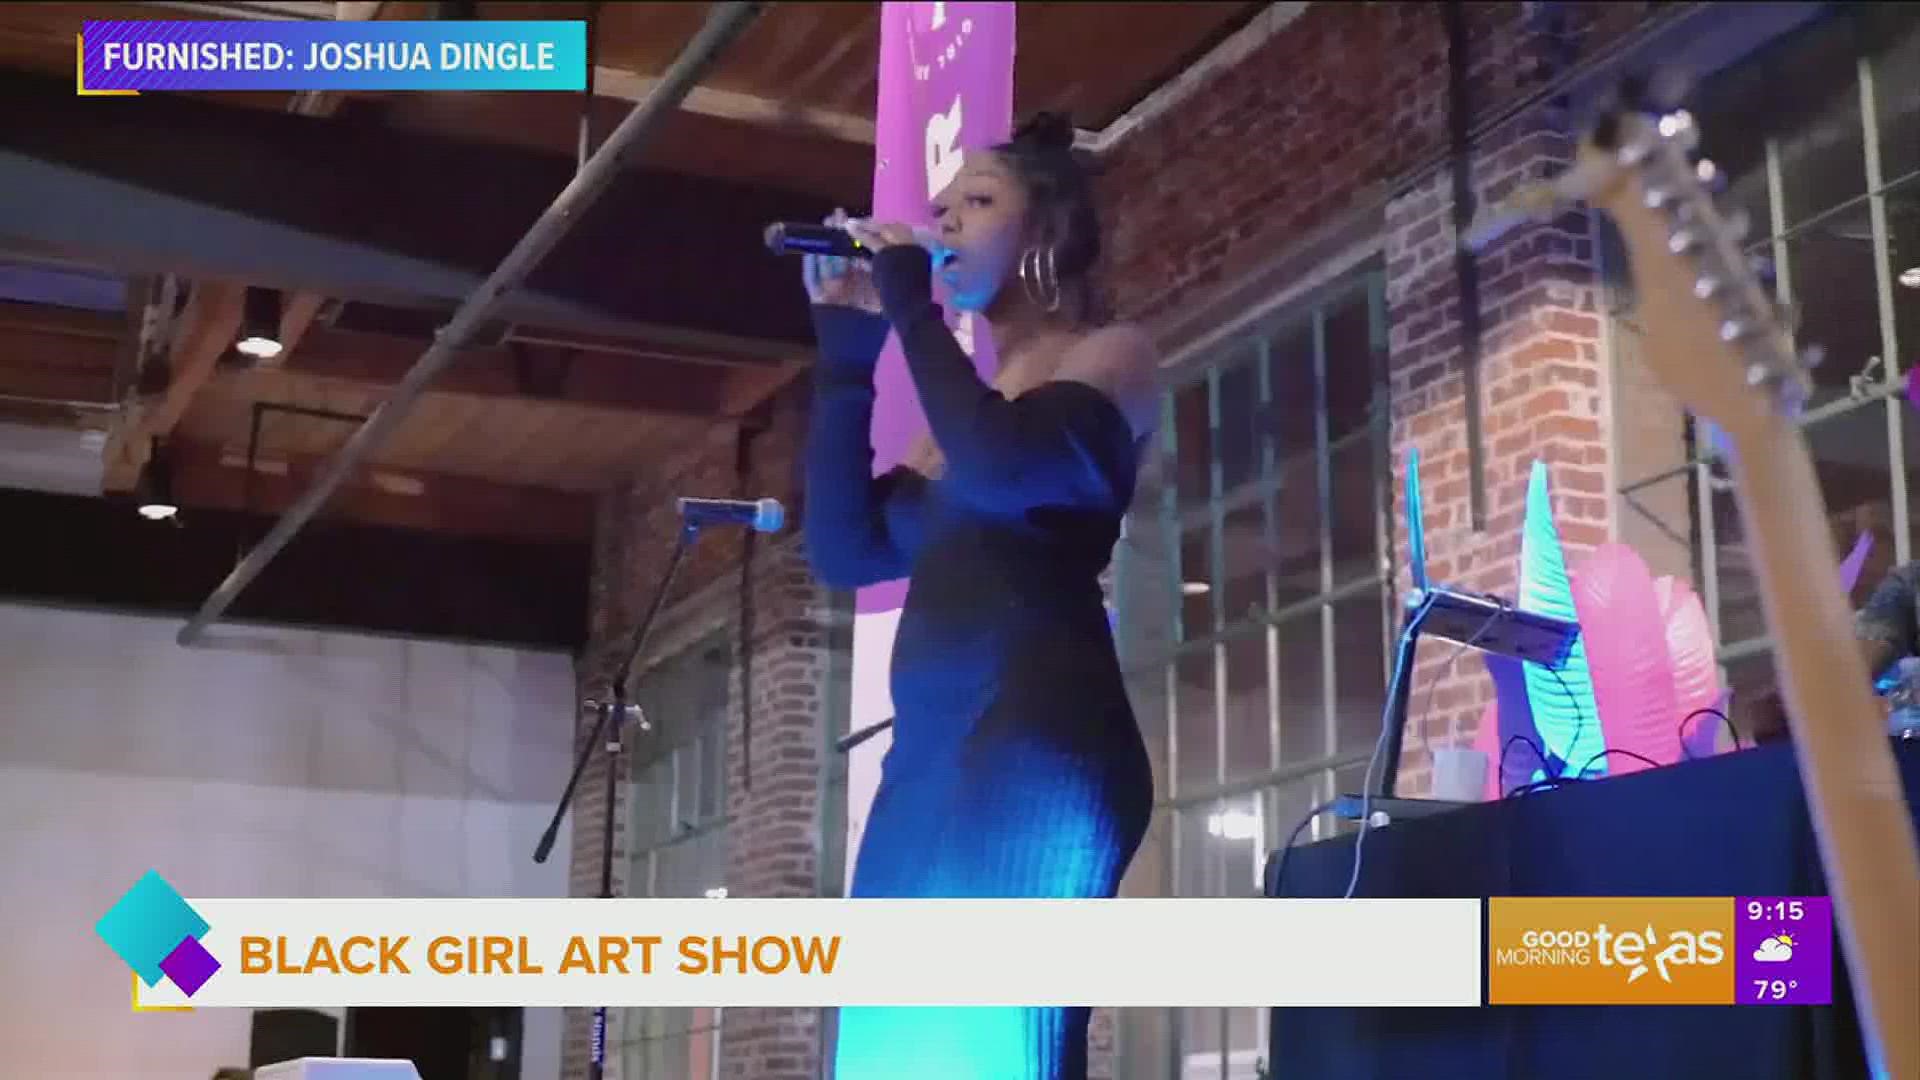 Some of the best art isn't found in a museum. The black girl art show proves that. This weekend it's coming to big D and you won't want to miss it.